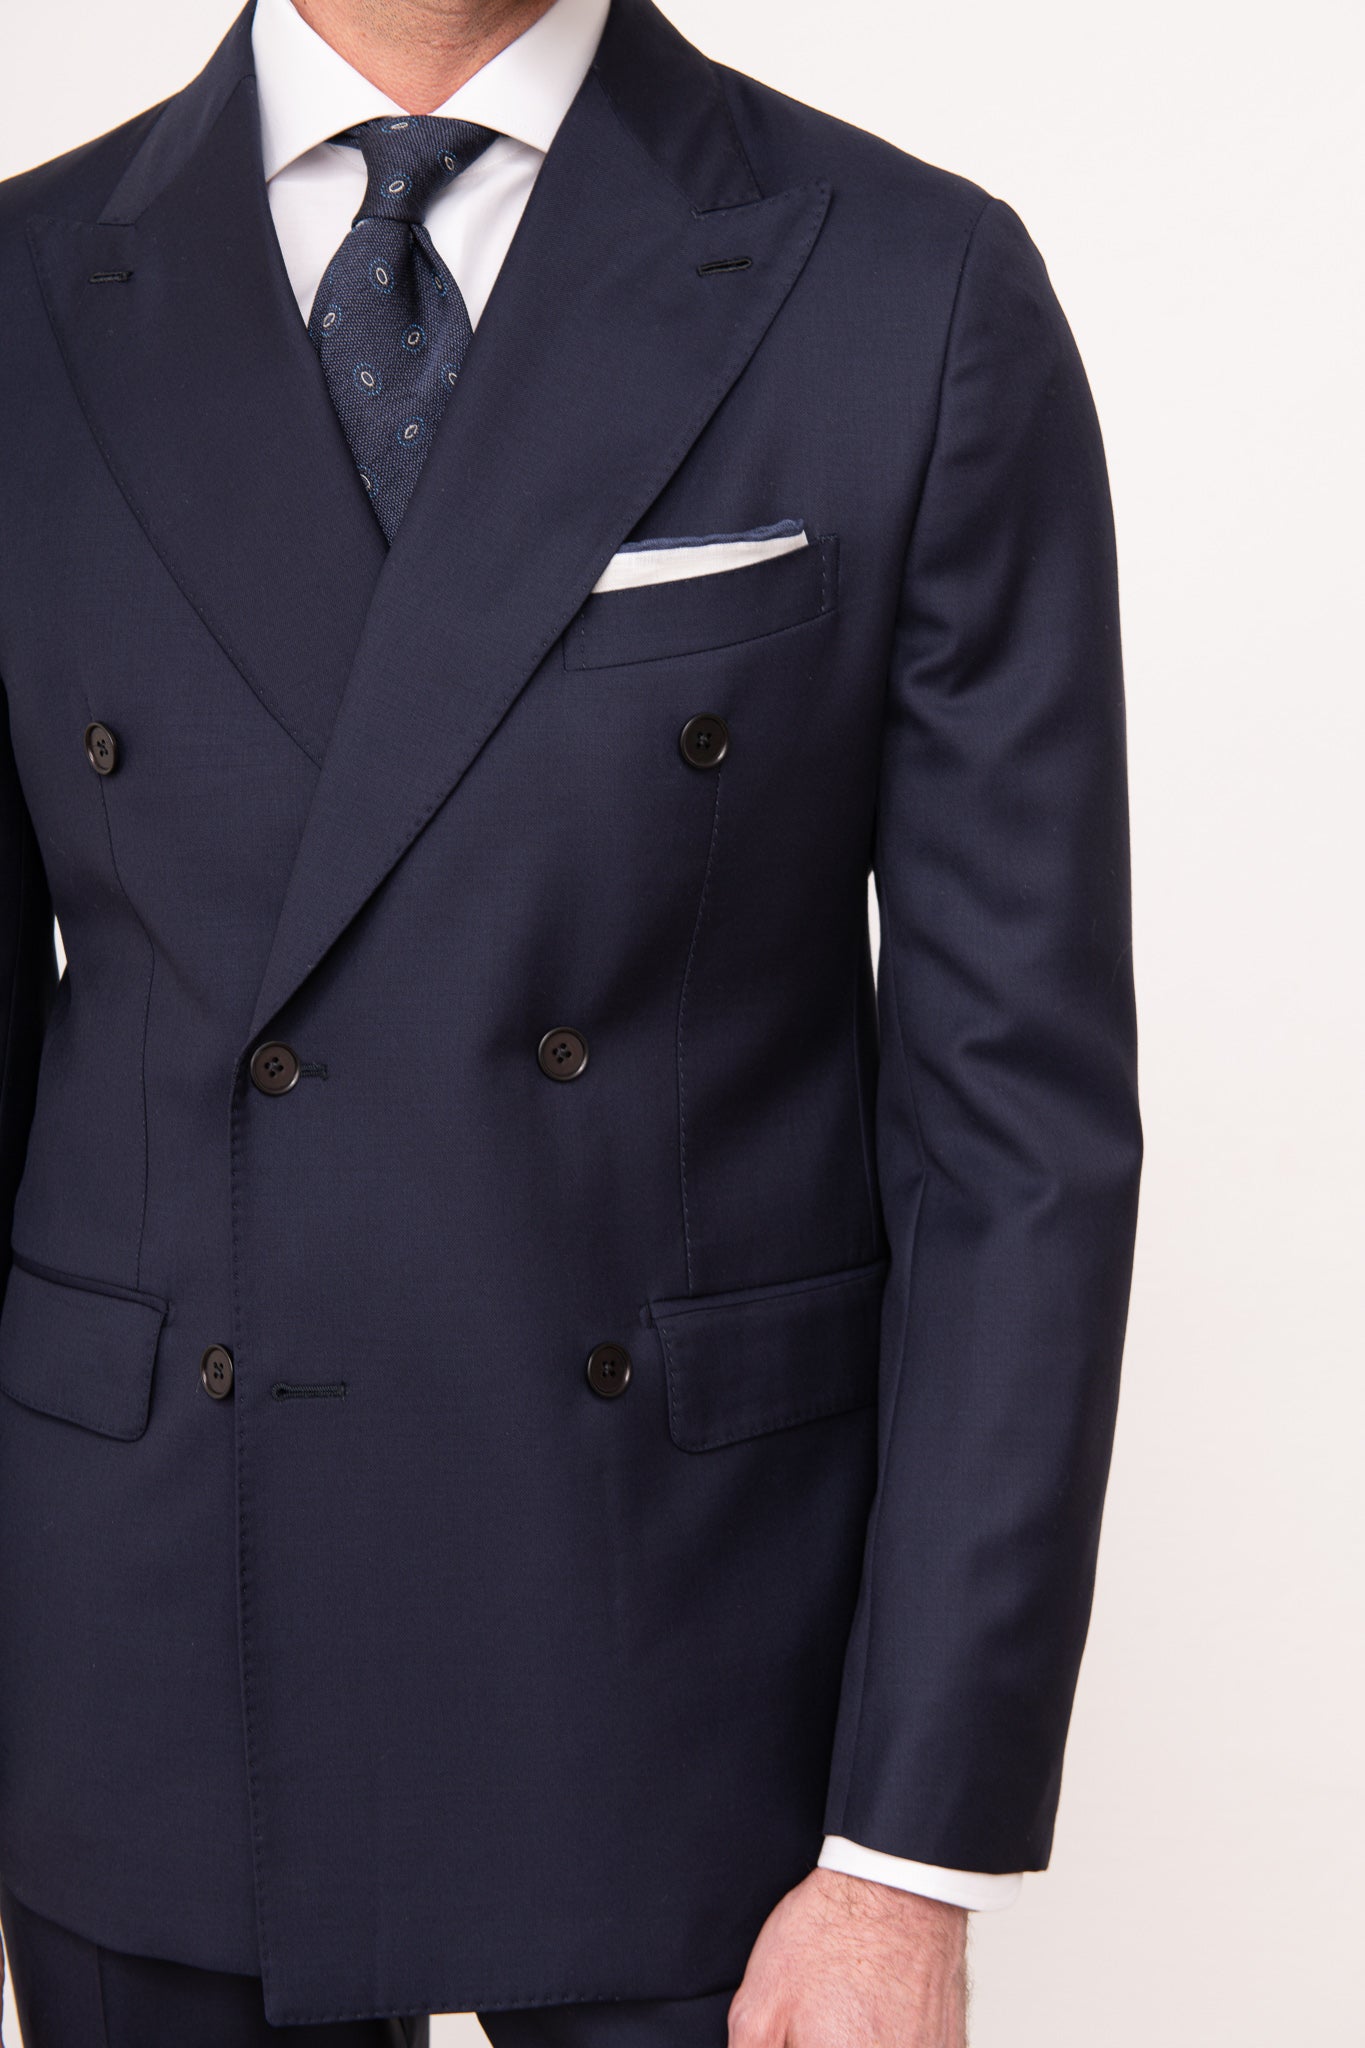 Blue double breasted suit - Made in Italy